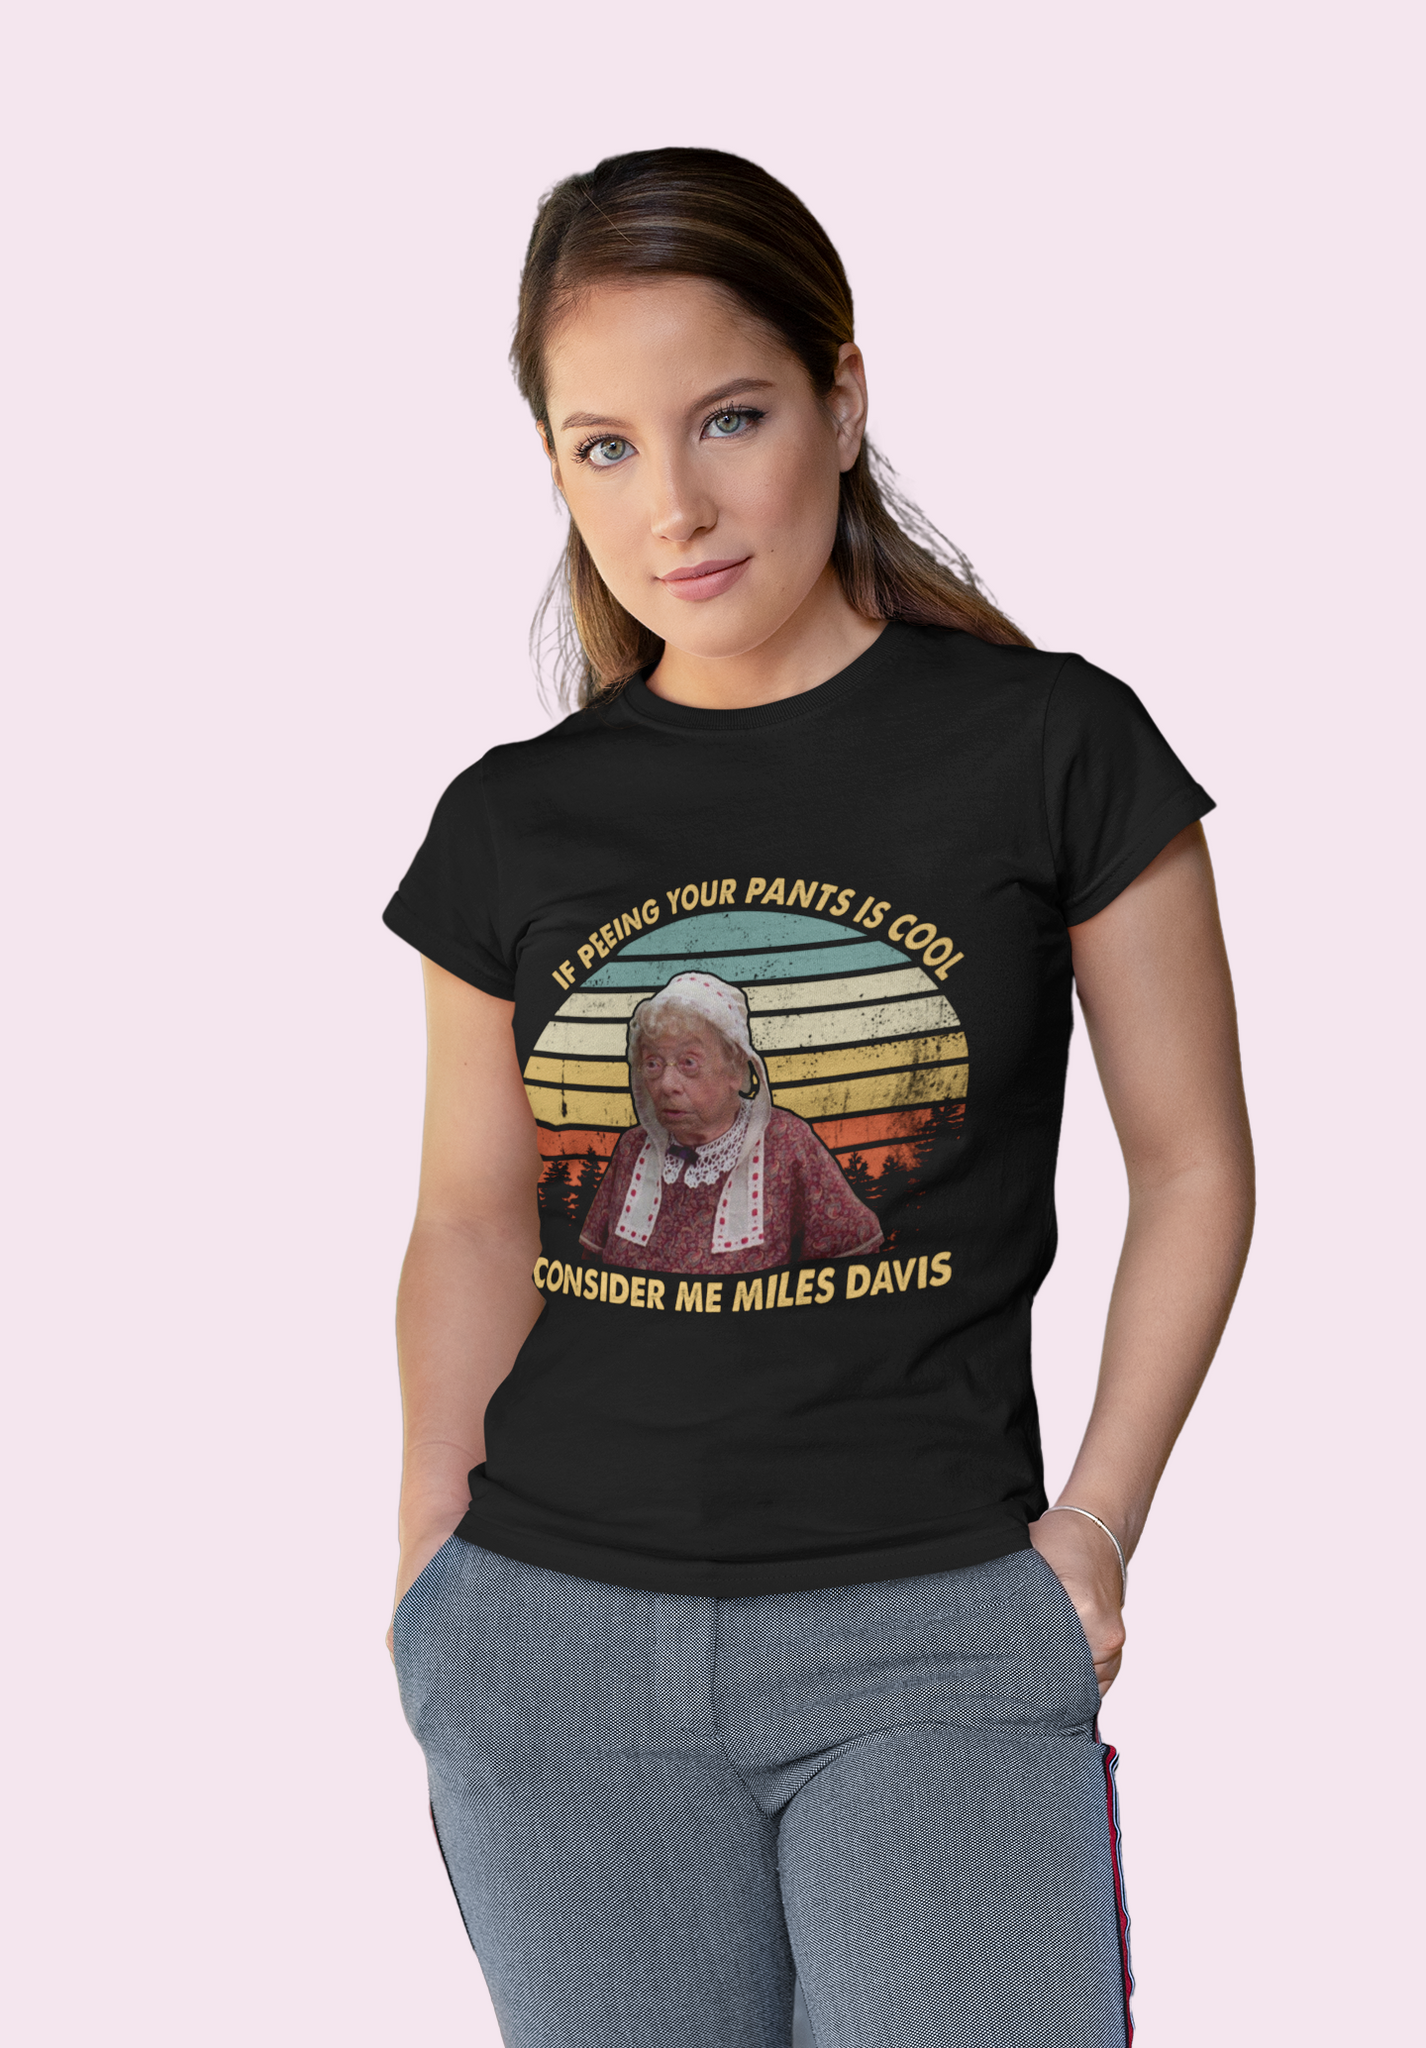 Billy Madison Comedy T Shirt, Old Farm Lady T Shirt, If Peeing Your Pants Is Cool Consider Me Miles Davis Tshirt